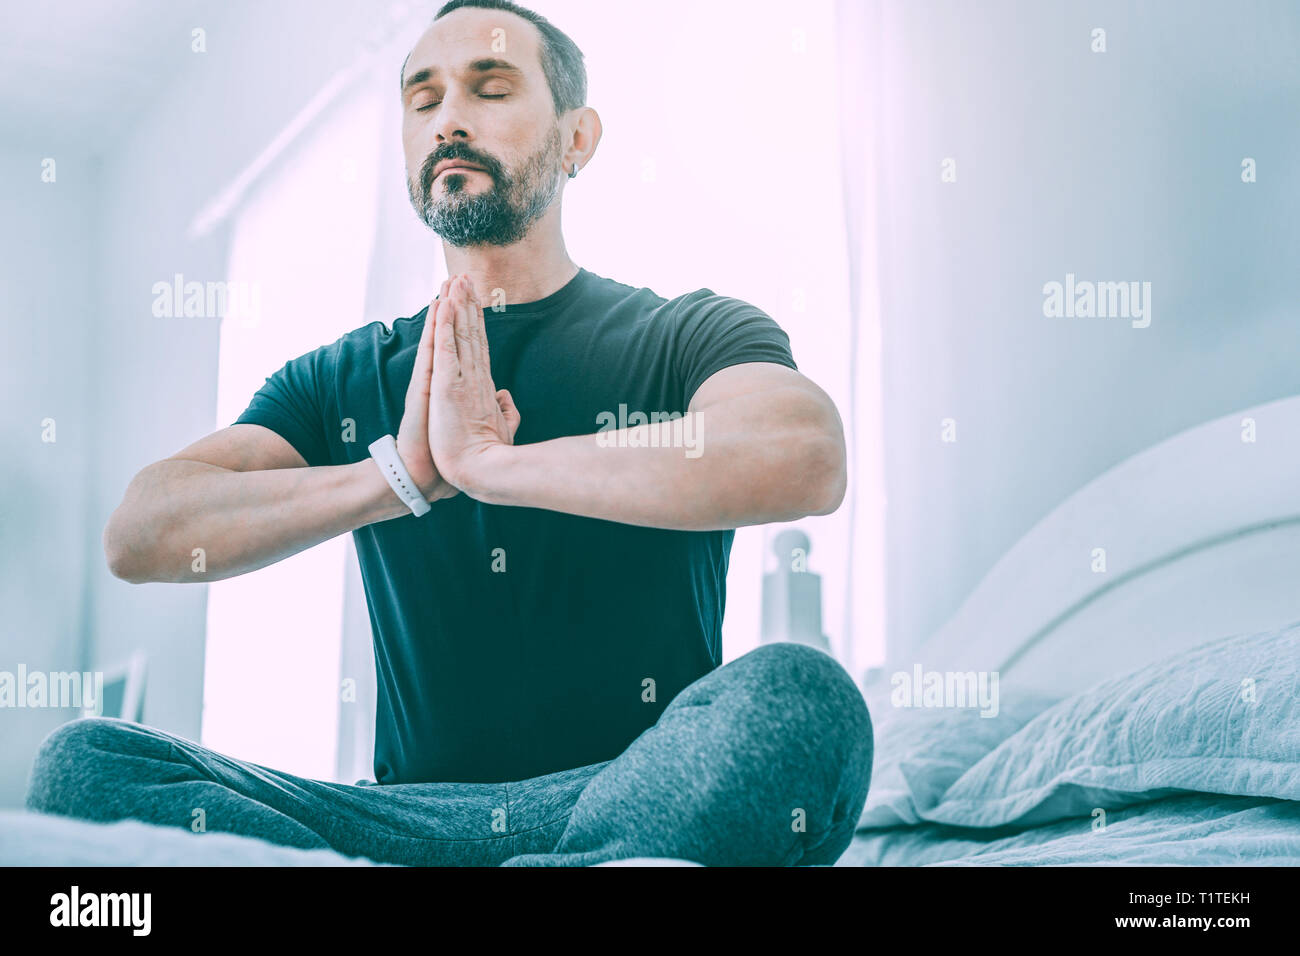 Inspired relaxed man meditating in a light room Stock Photo